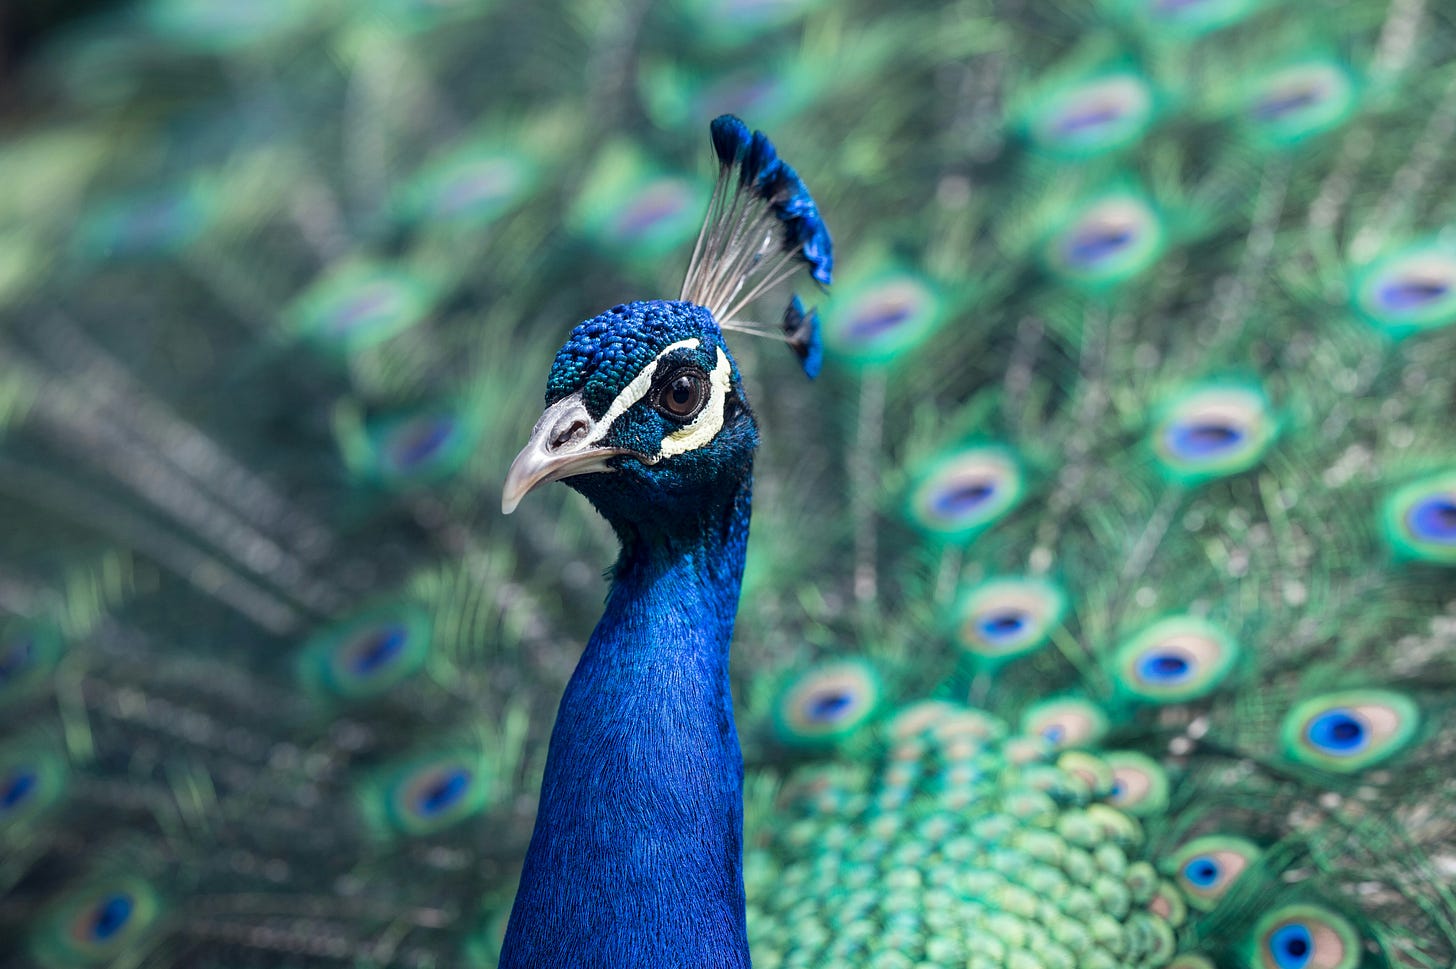 Close-up shot of a peacock with green and blue feathers fanned in display behind them